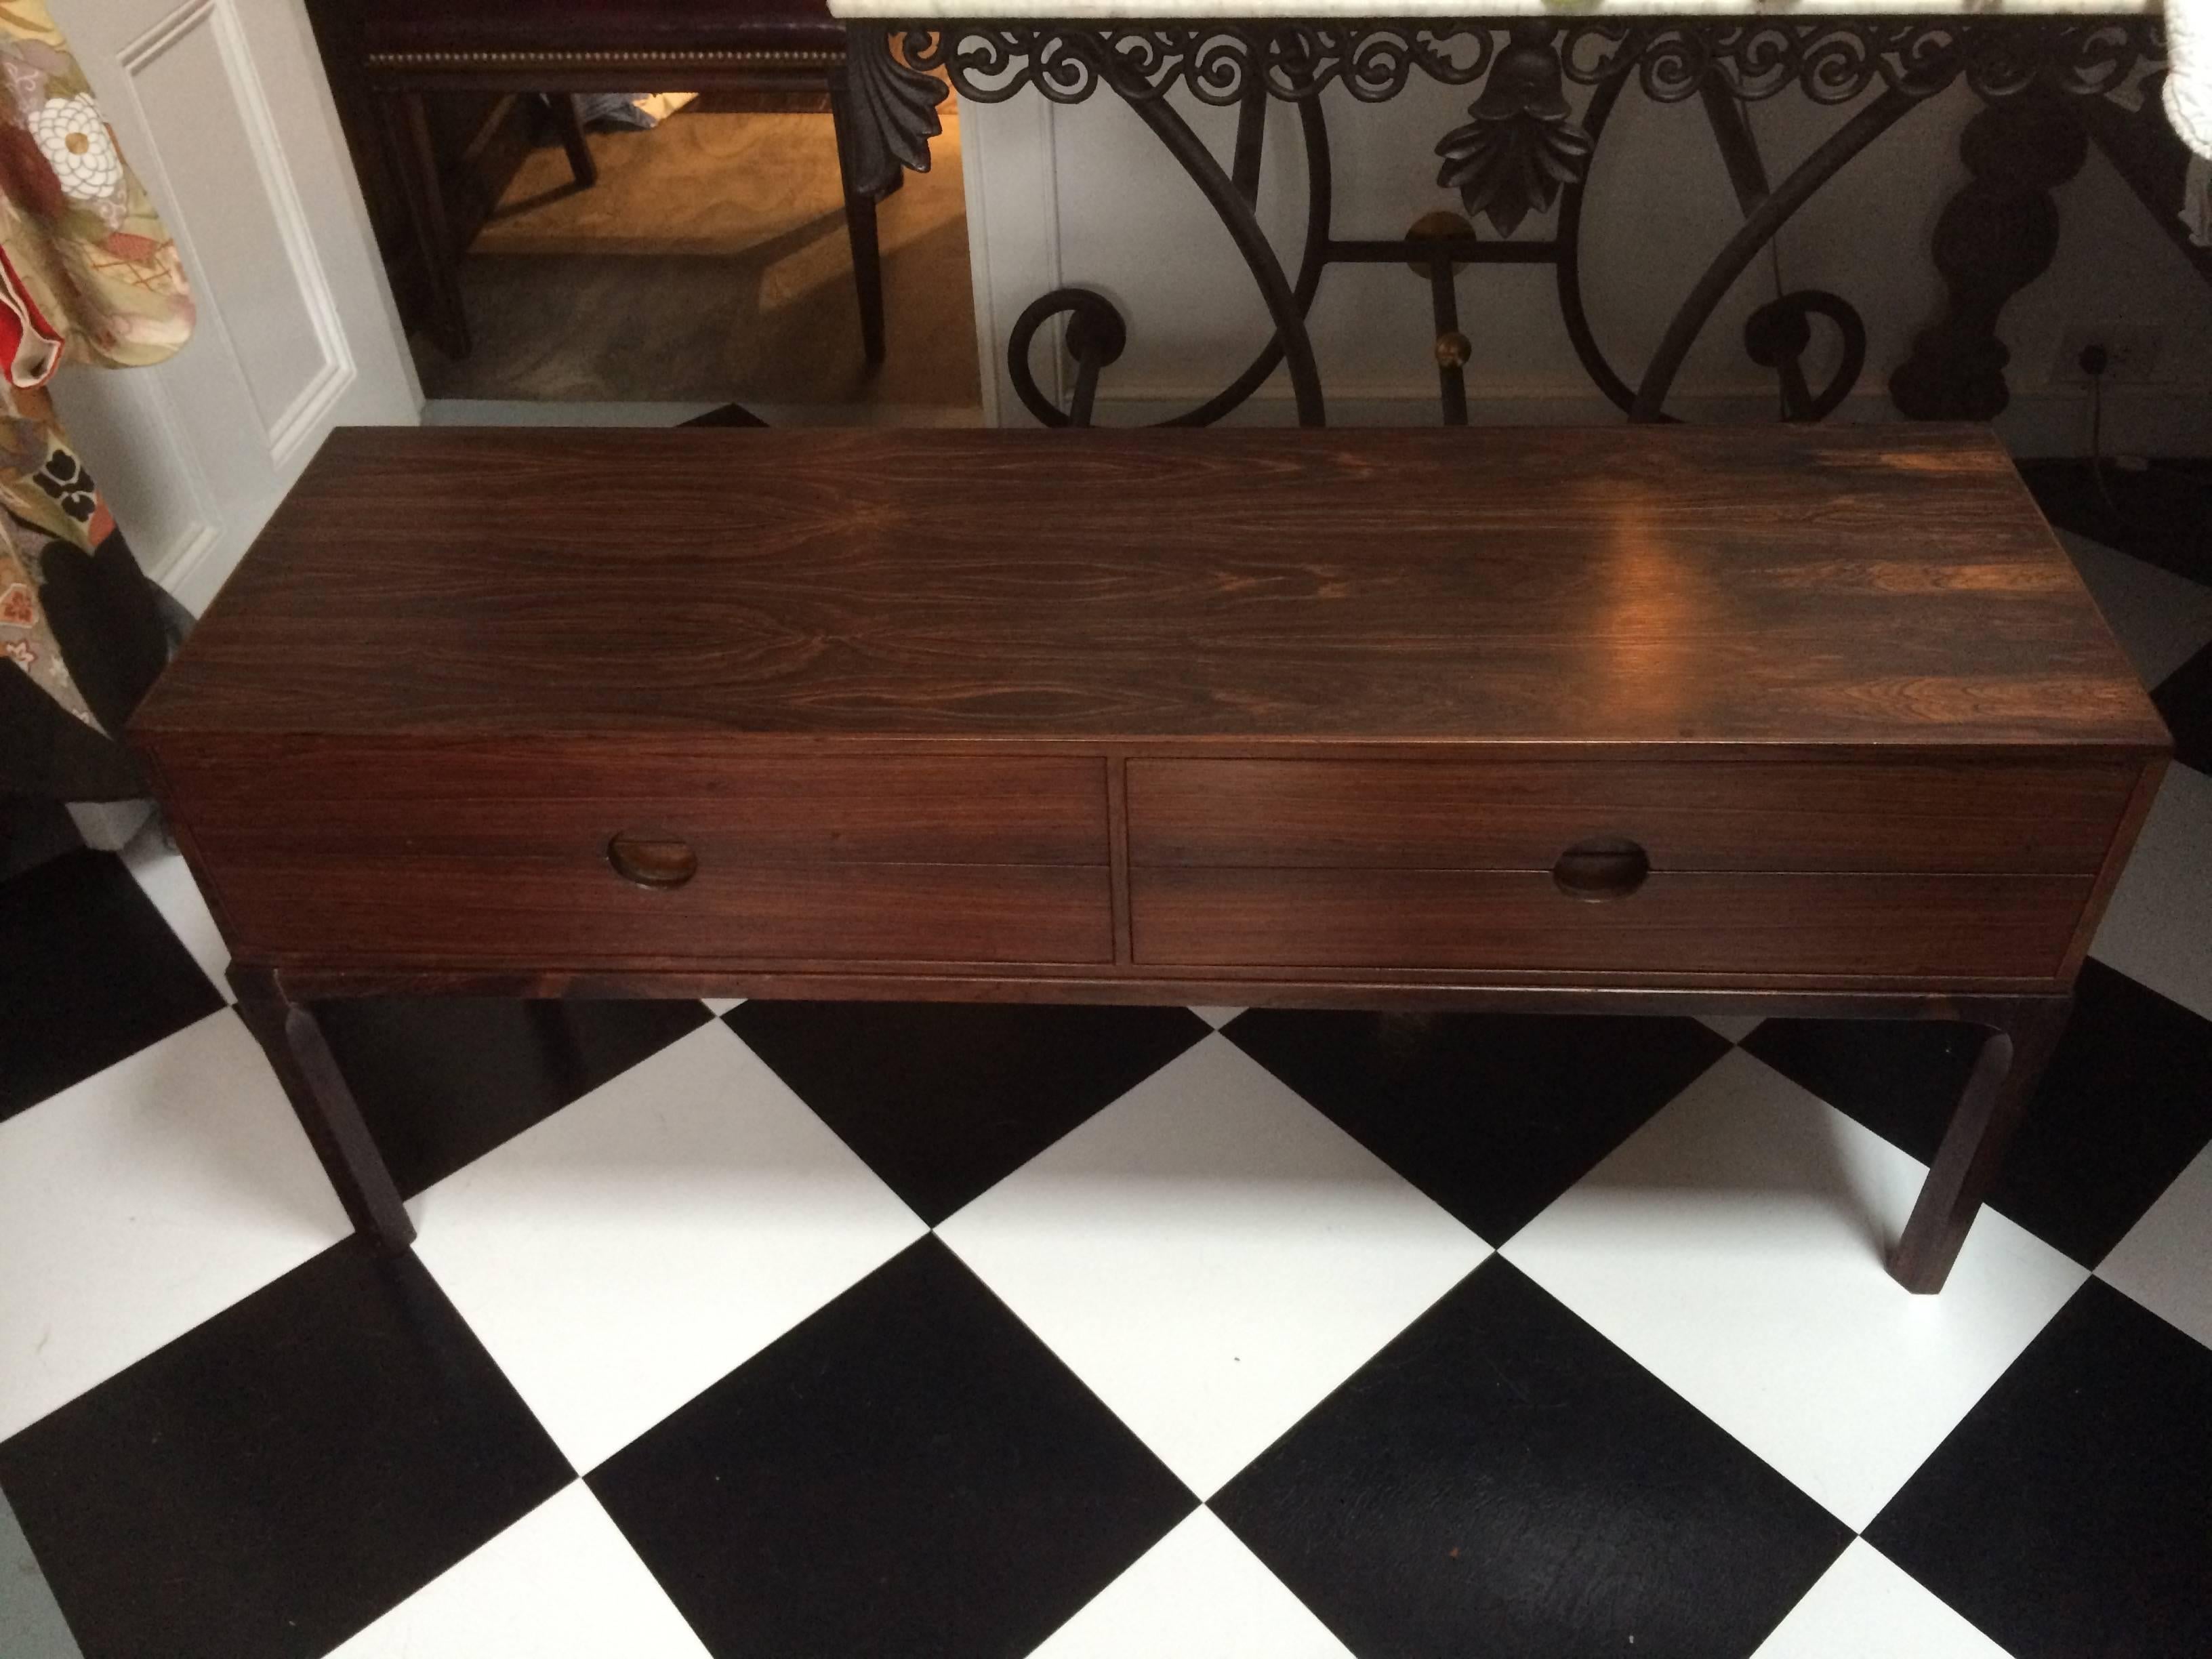 A lovely low console table with four drawers.